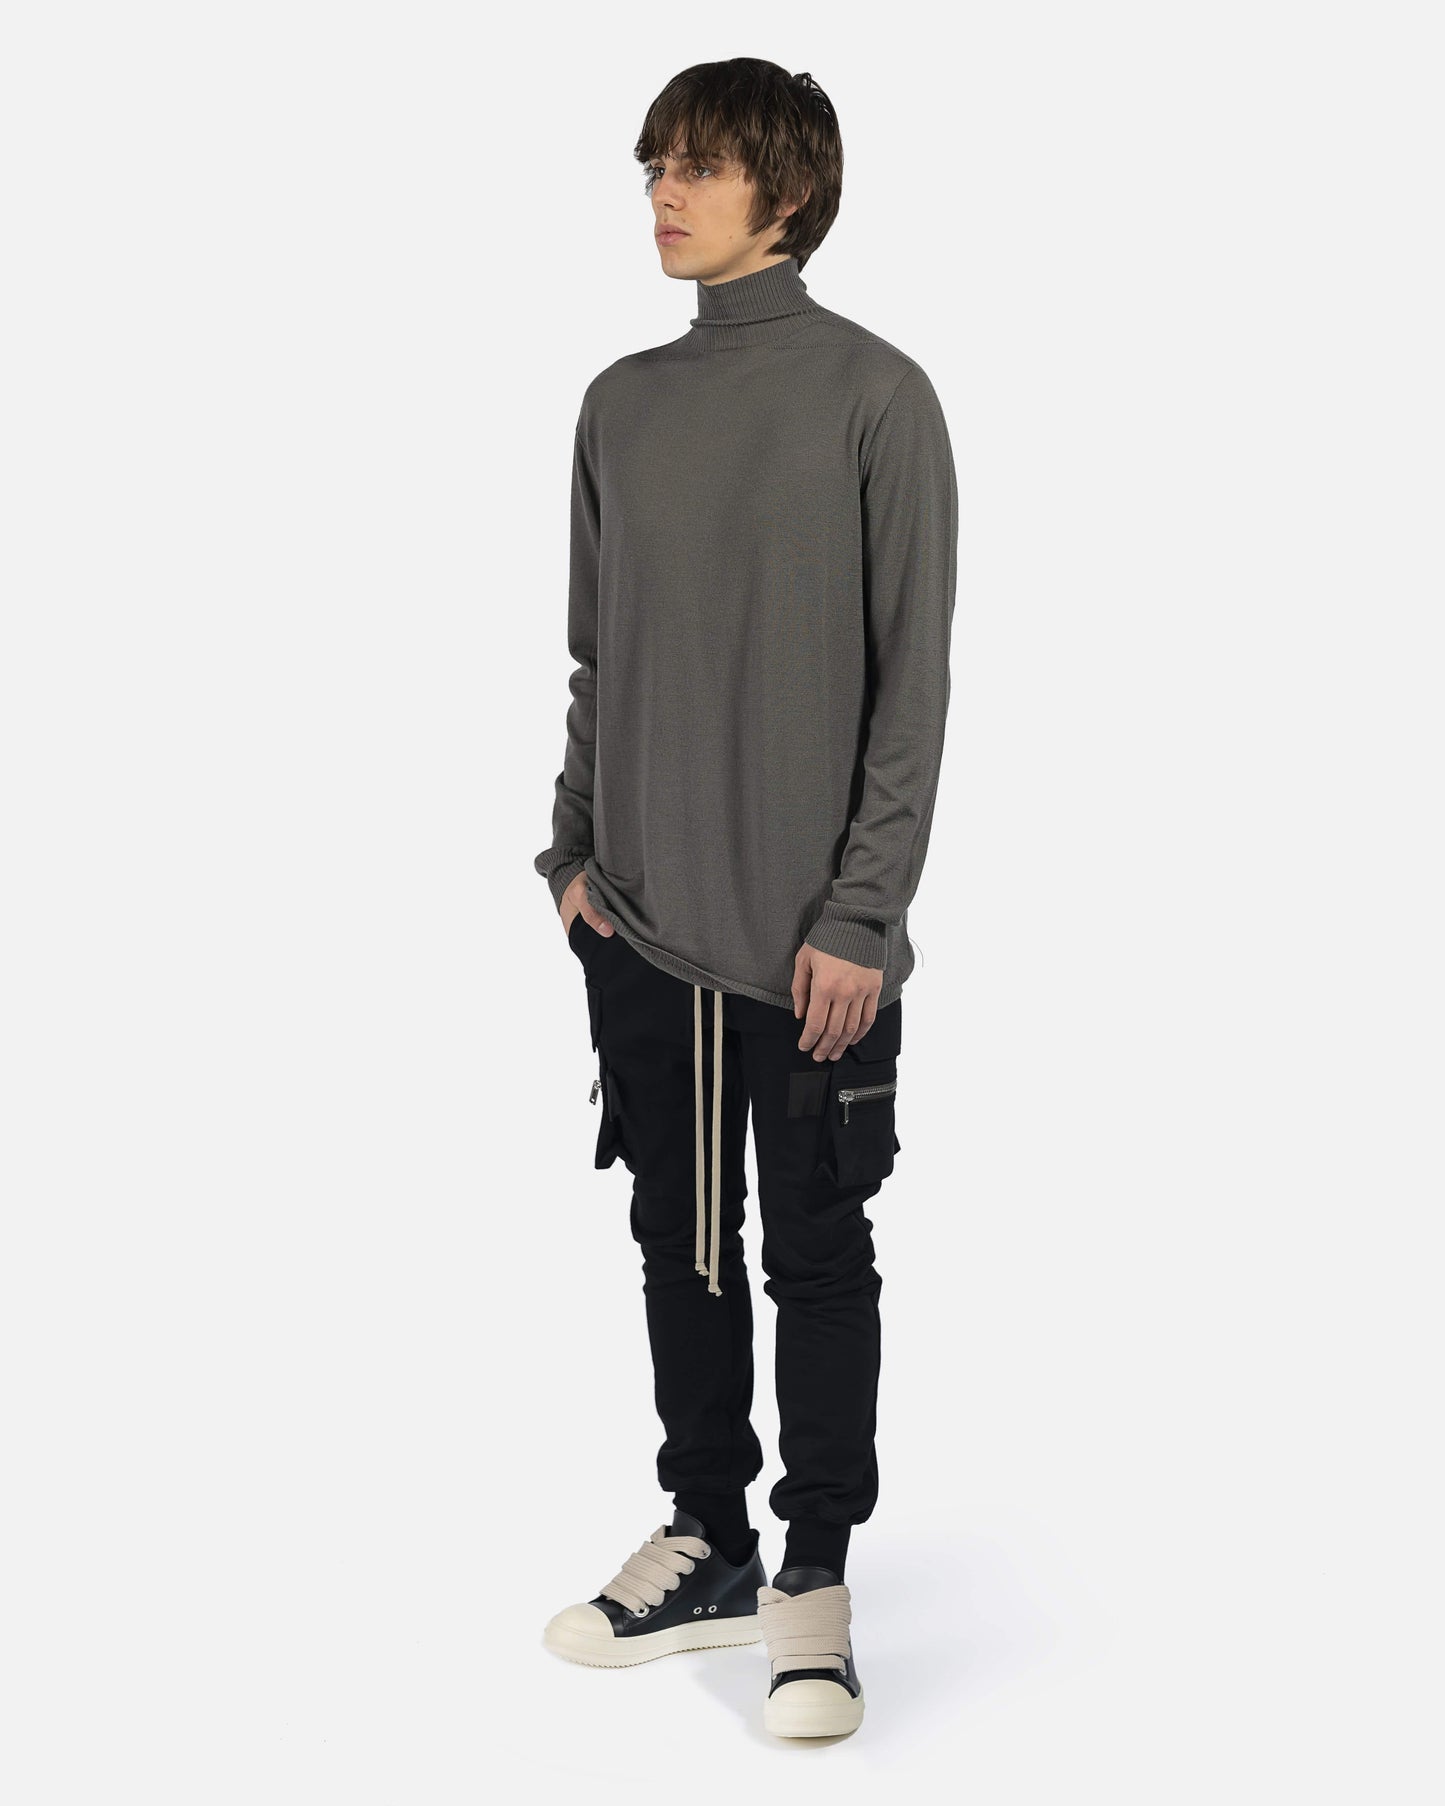 Rick Owens mens sweater Oversized Turtle Neck Sweater in Dust